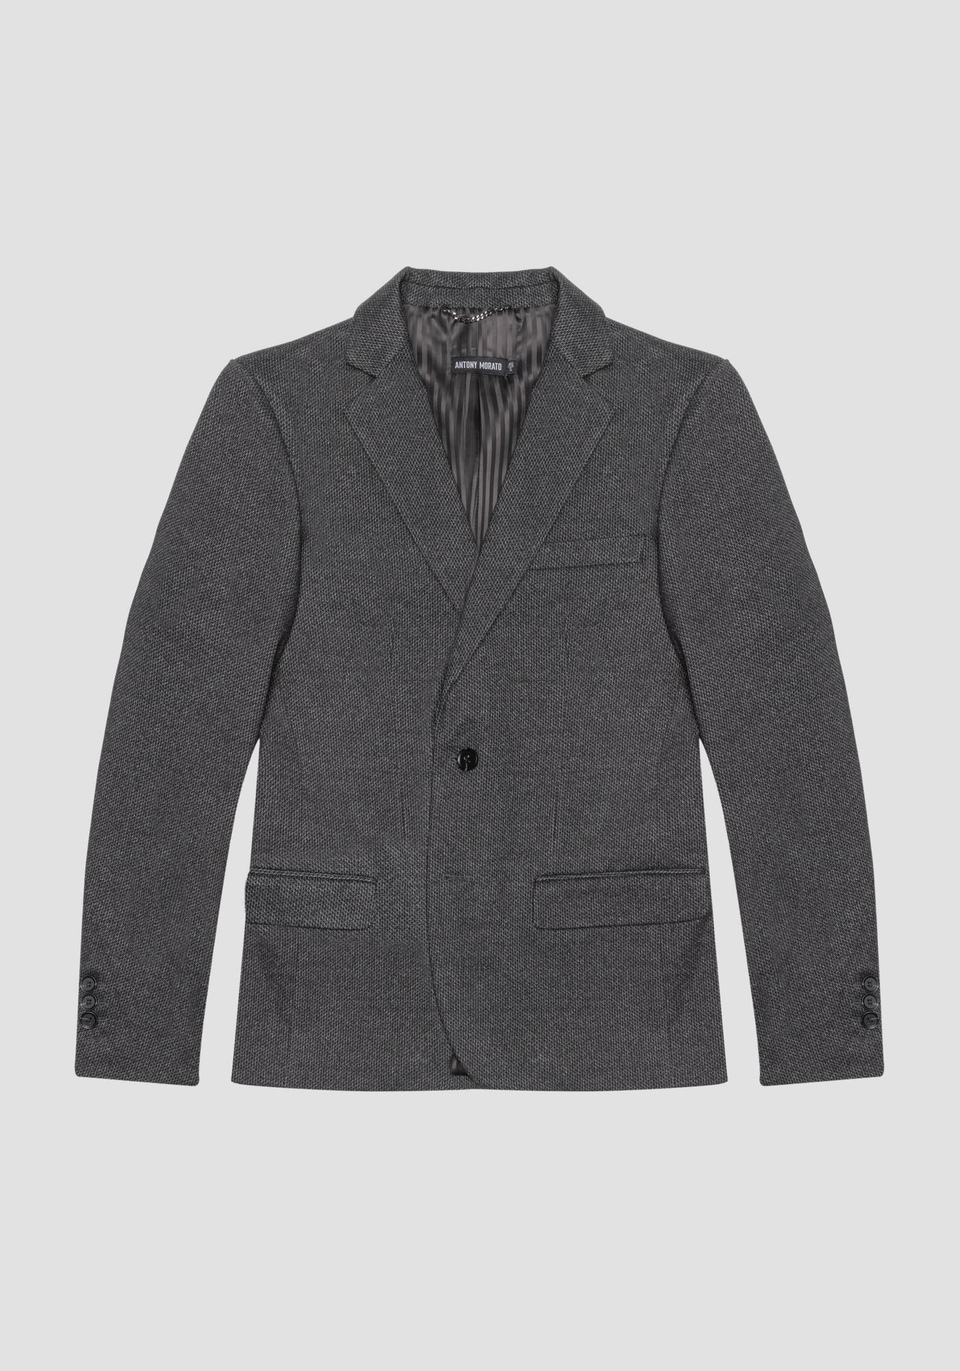 "ASHE" SUPER SLIM FIT JACKET IN STRETCH VISCOSE BLEND FABRIC WITH WARM FEEL EFFECT - Antony Morato Online Shop